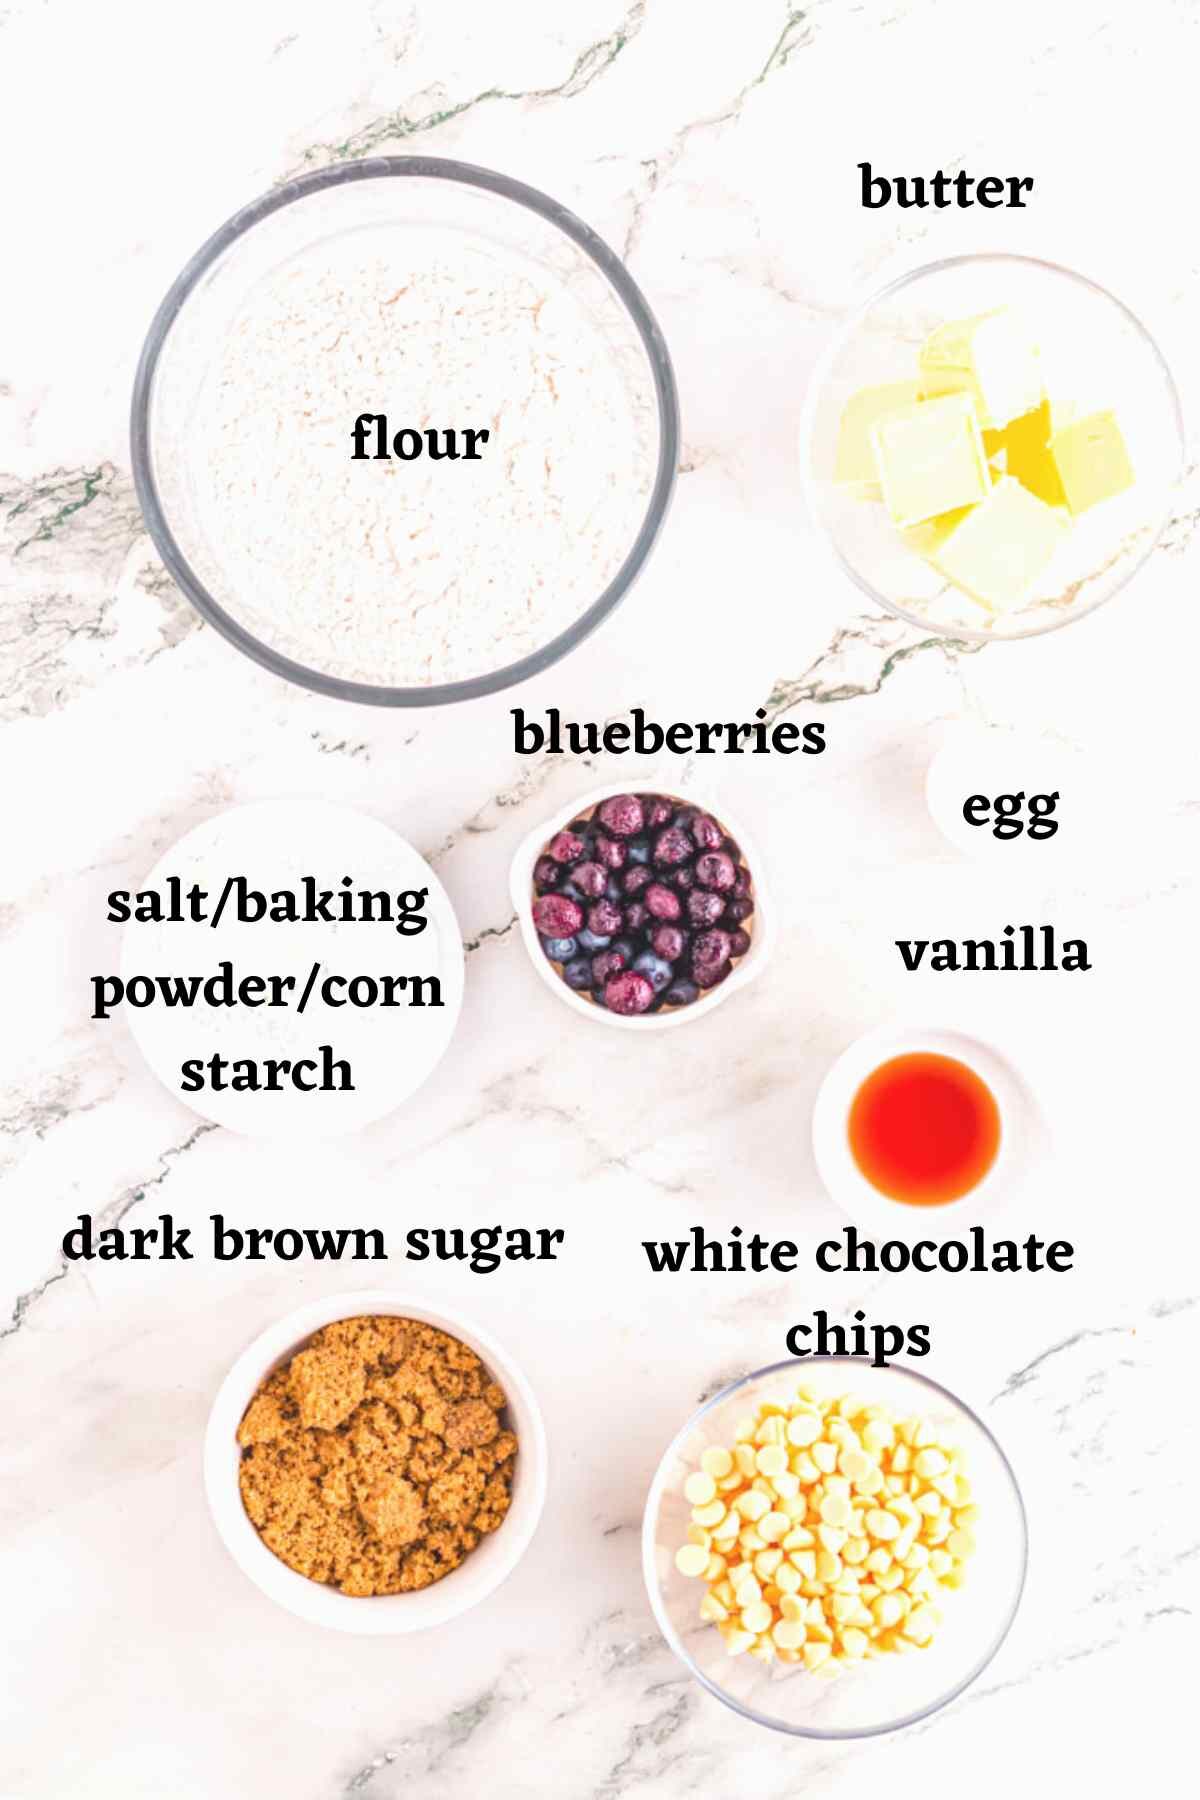 Ingredients needed to make Blueberry white chocolate chip cookies.